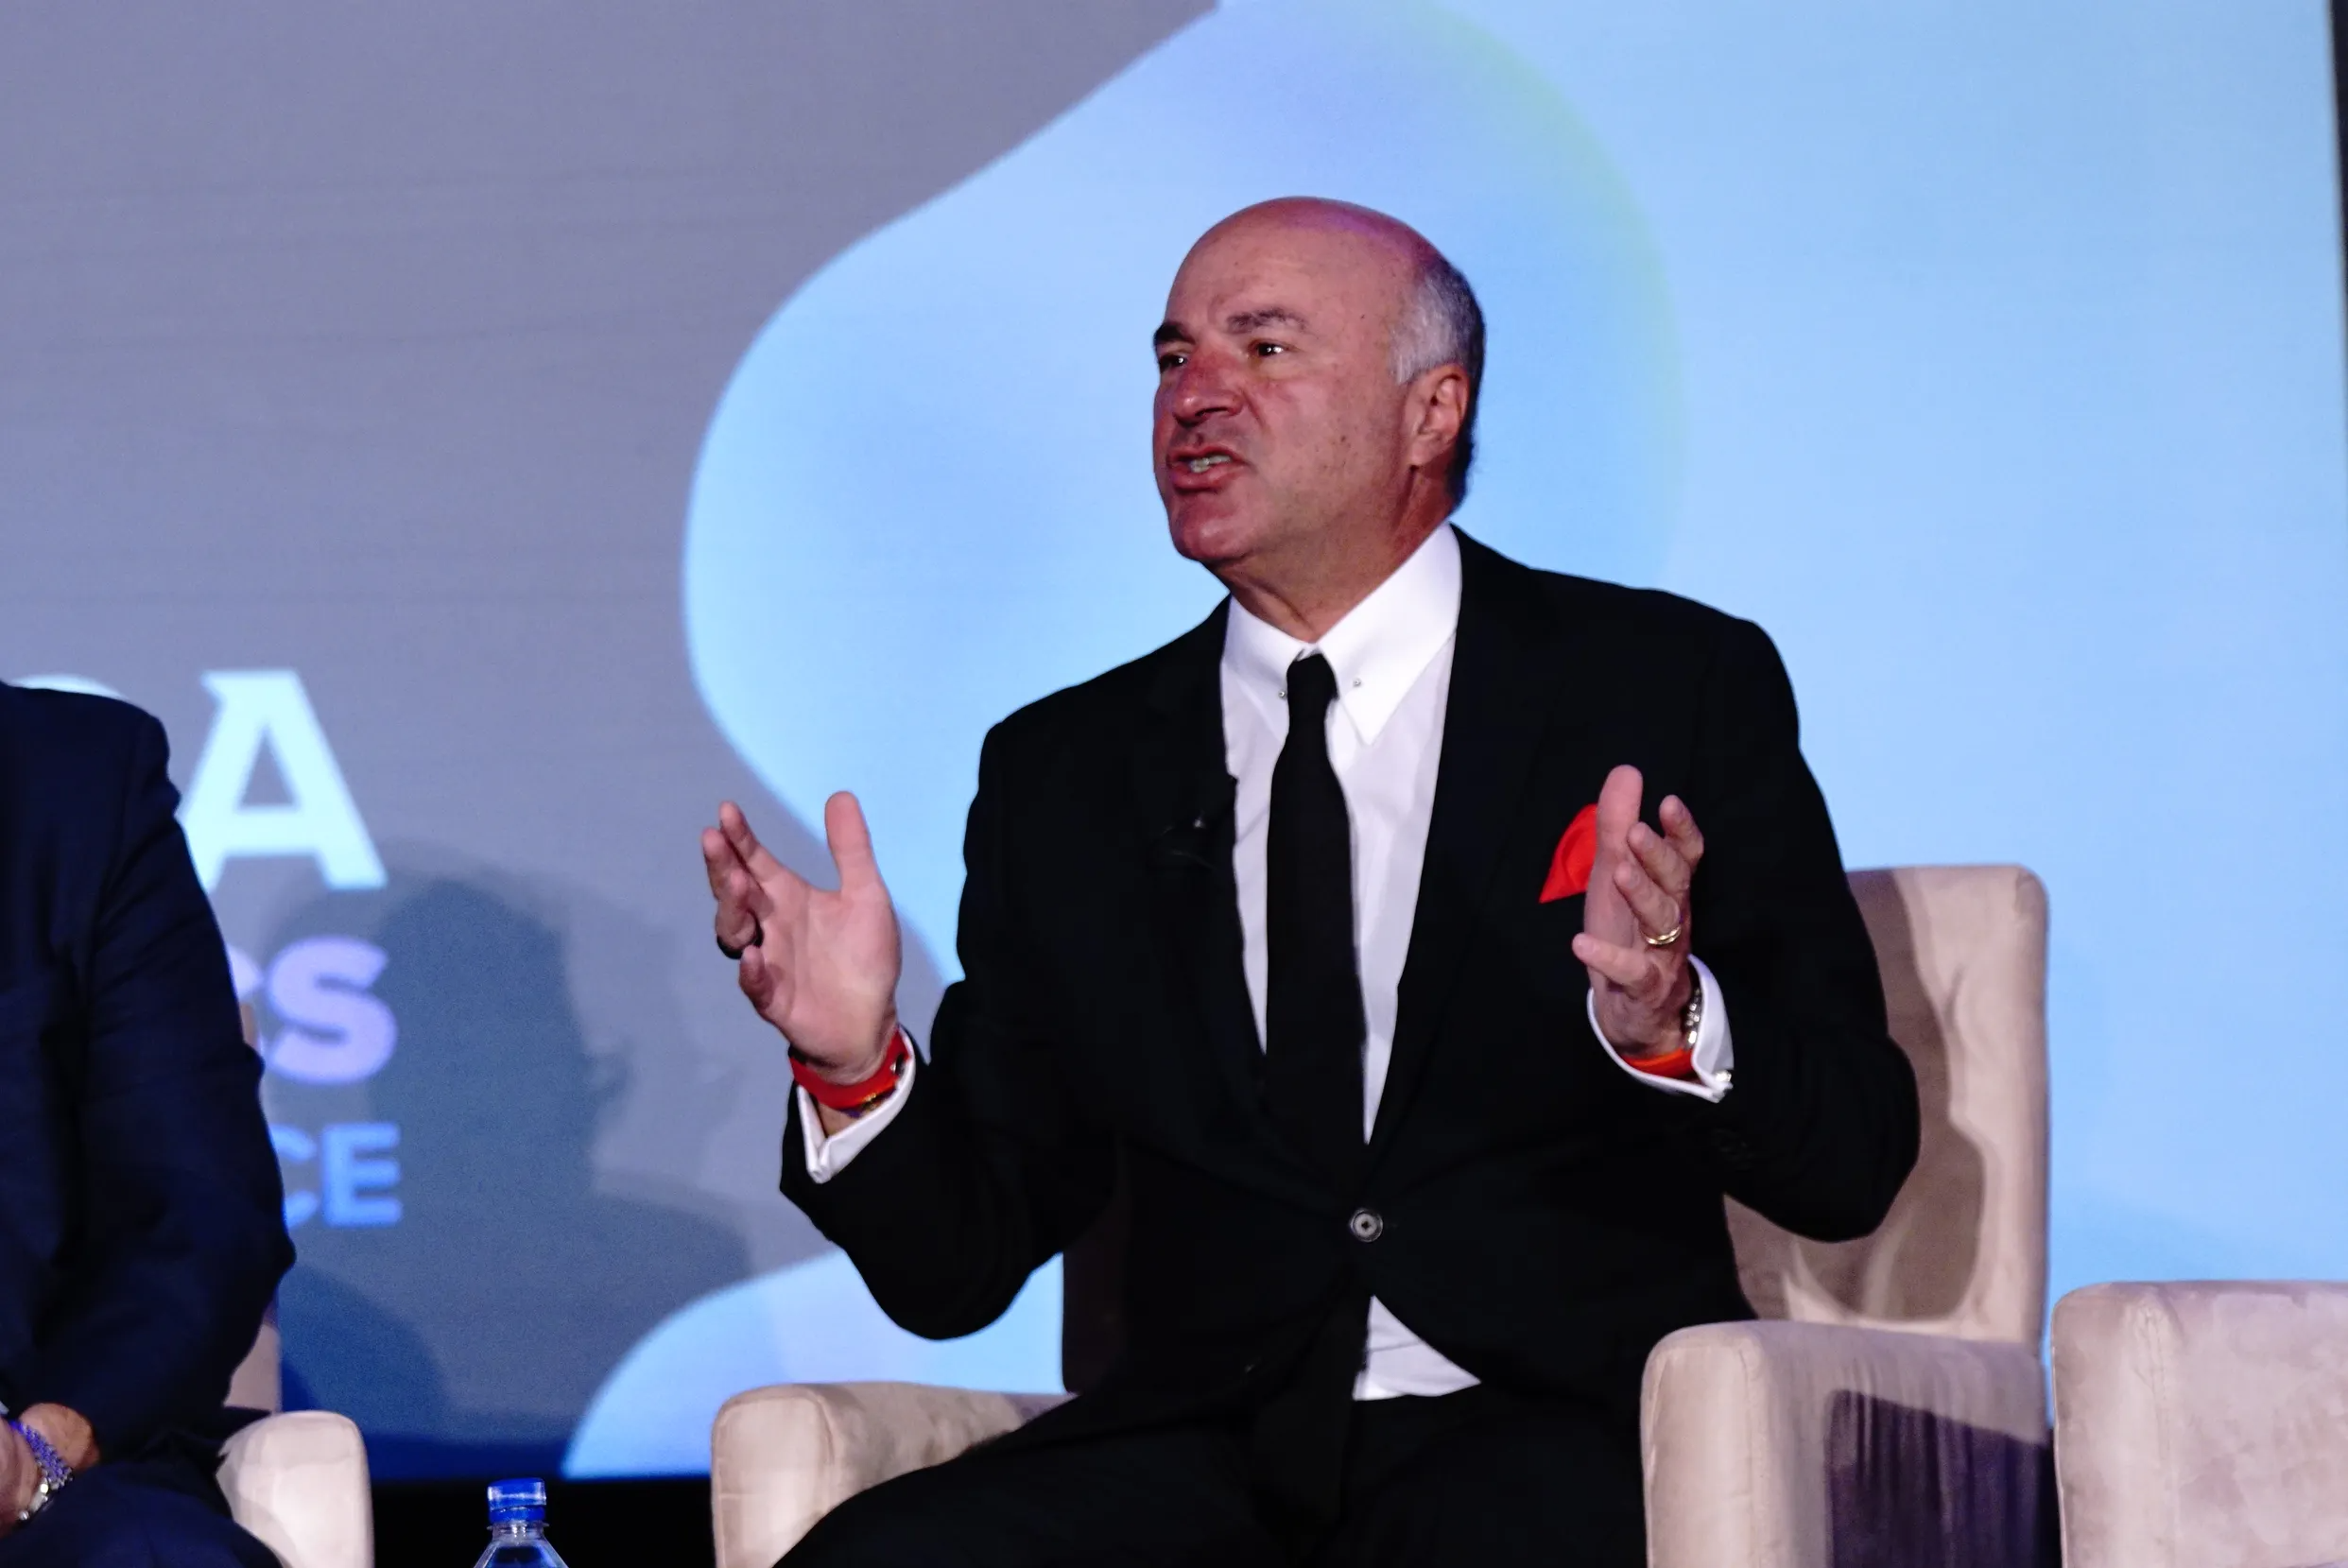 EXCLUSIVE: Kevin O'Leary Says 'Idiots' Are Holding Crypto Back, But Regulation Can Bolster Bitcoin Value